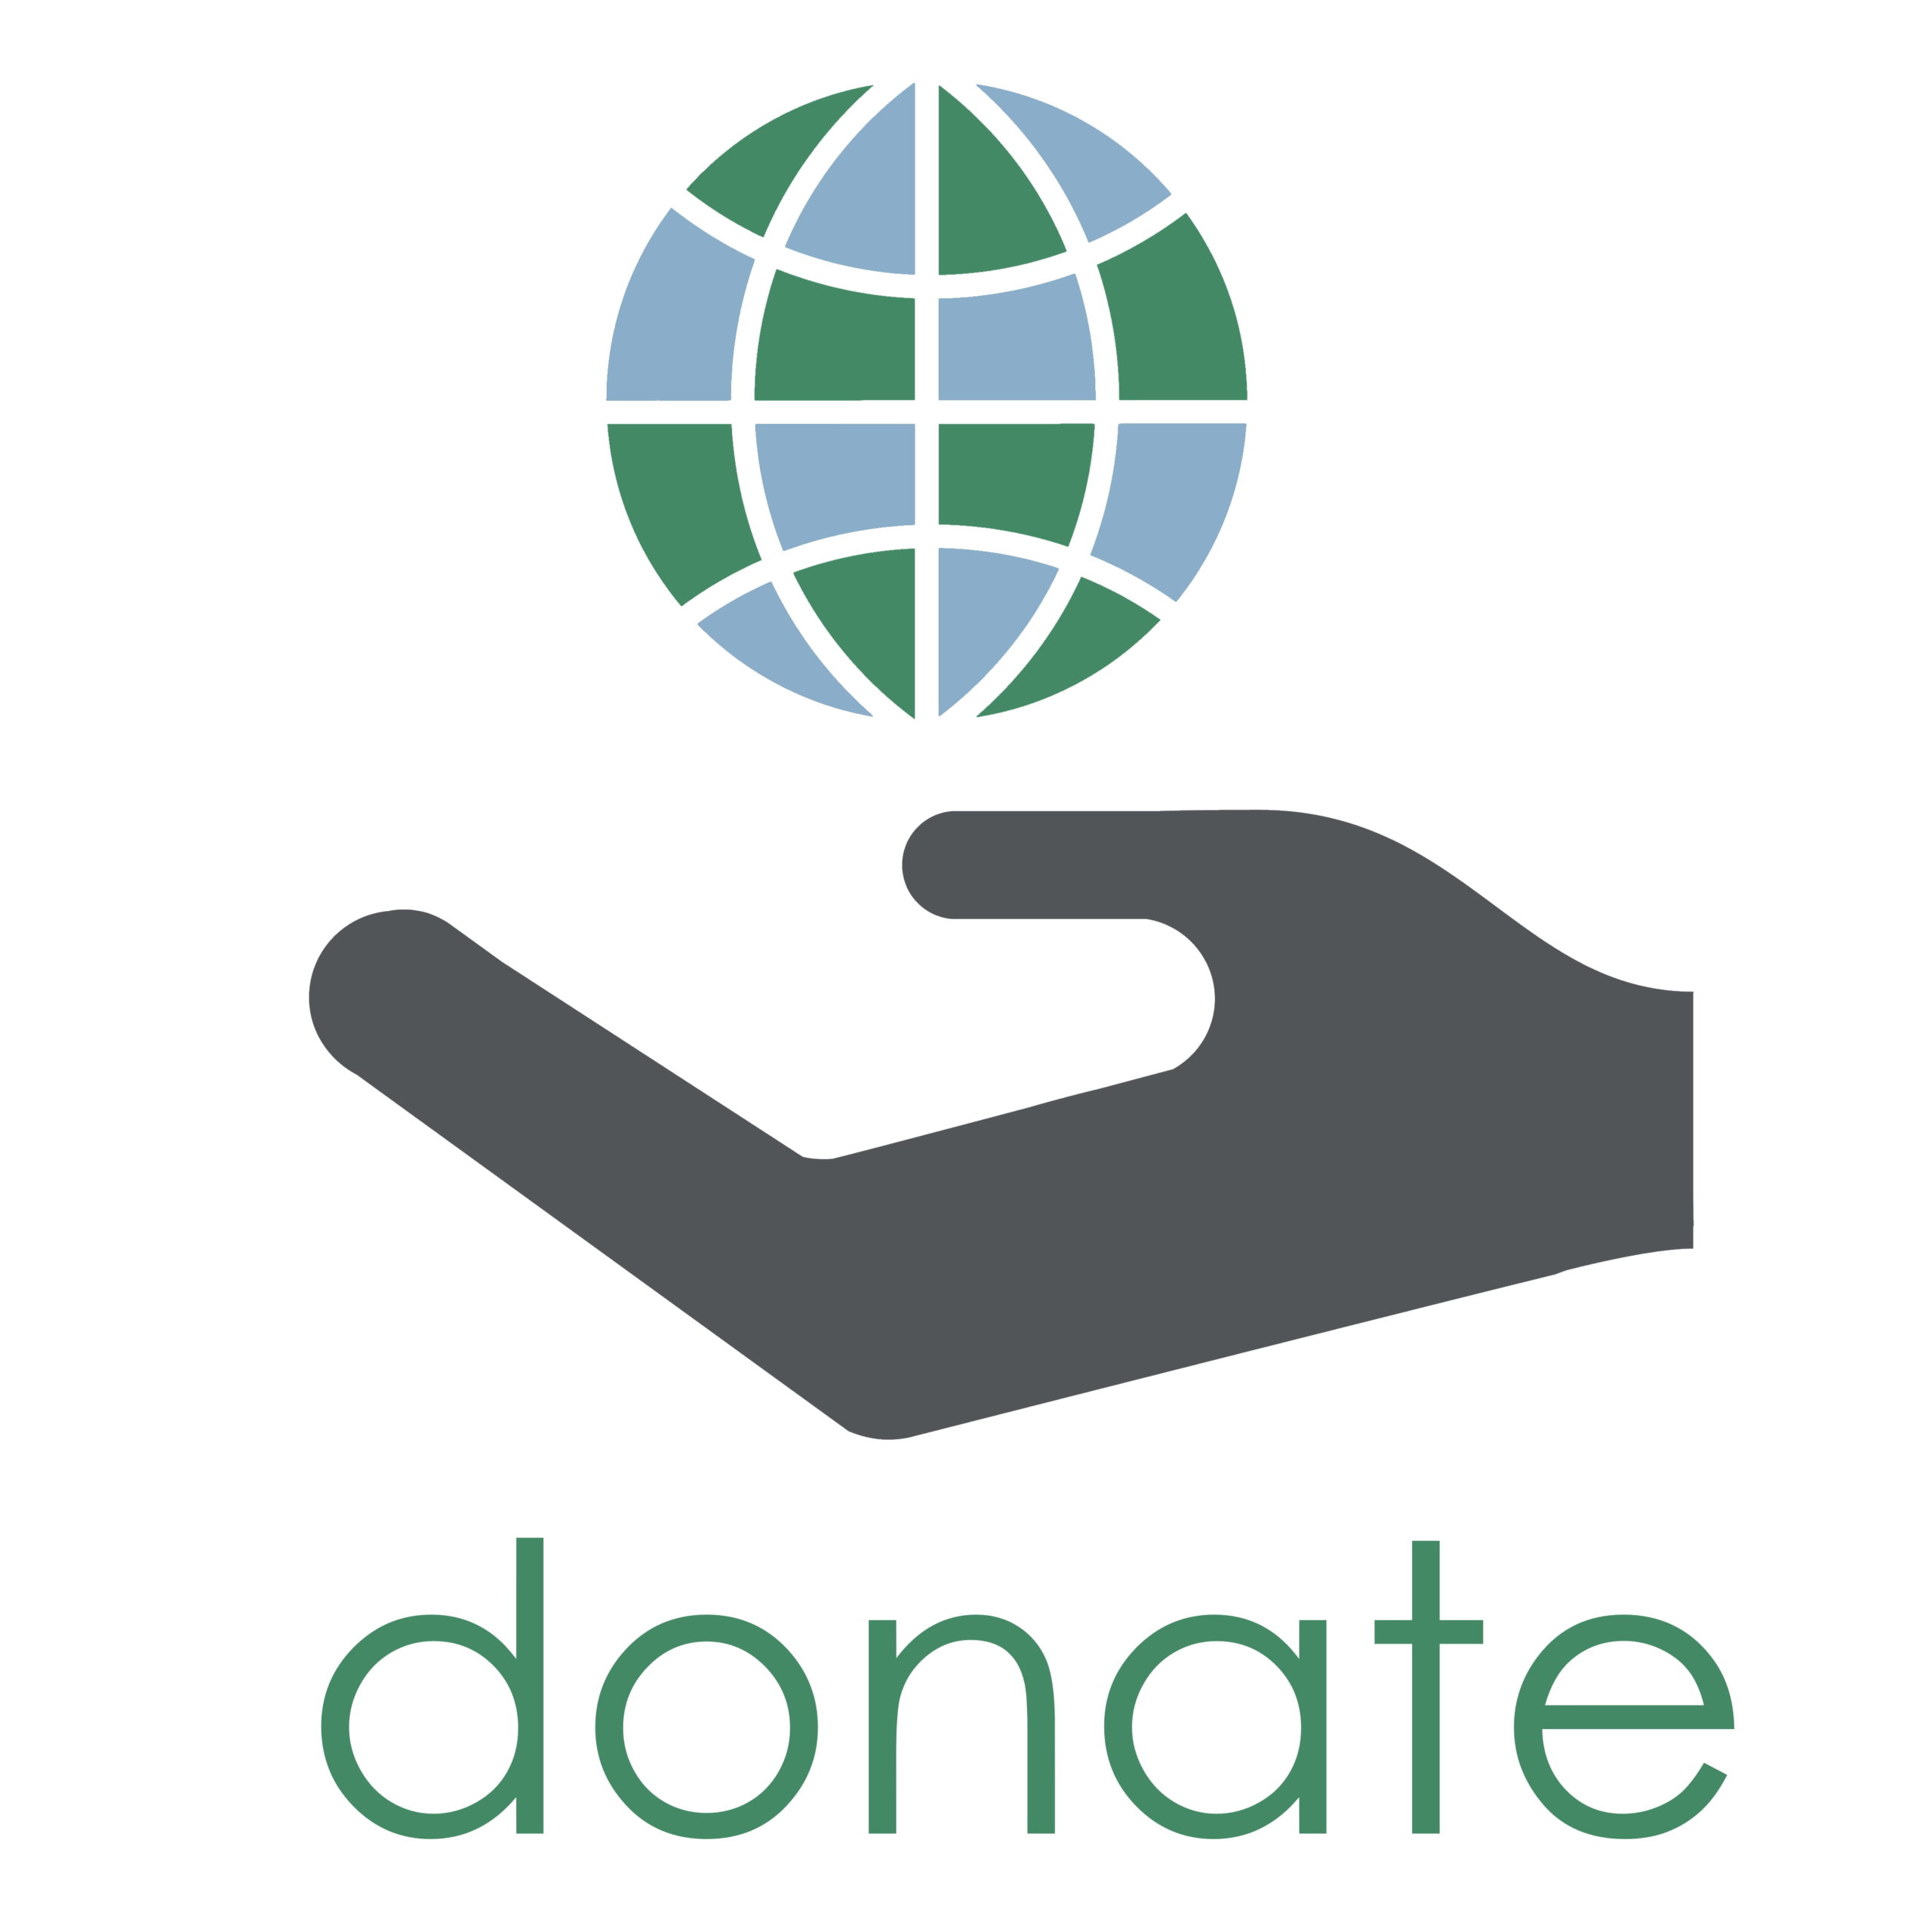 Donate logo. A hand holding the earth